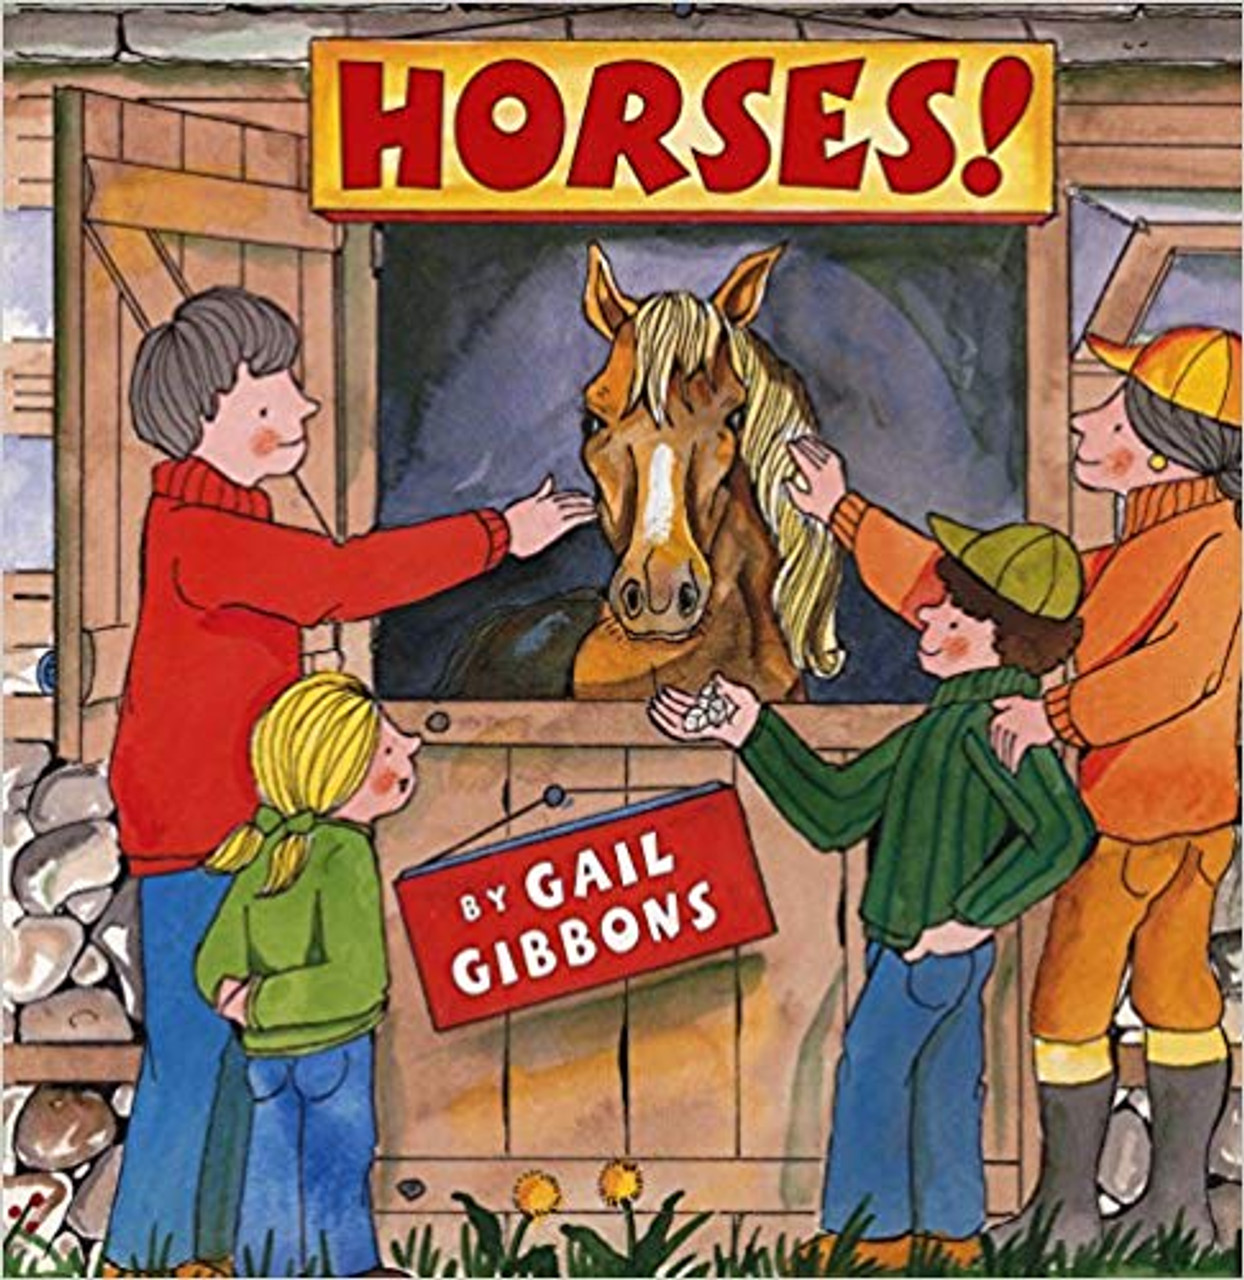 Horses! by Gail Gibbons